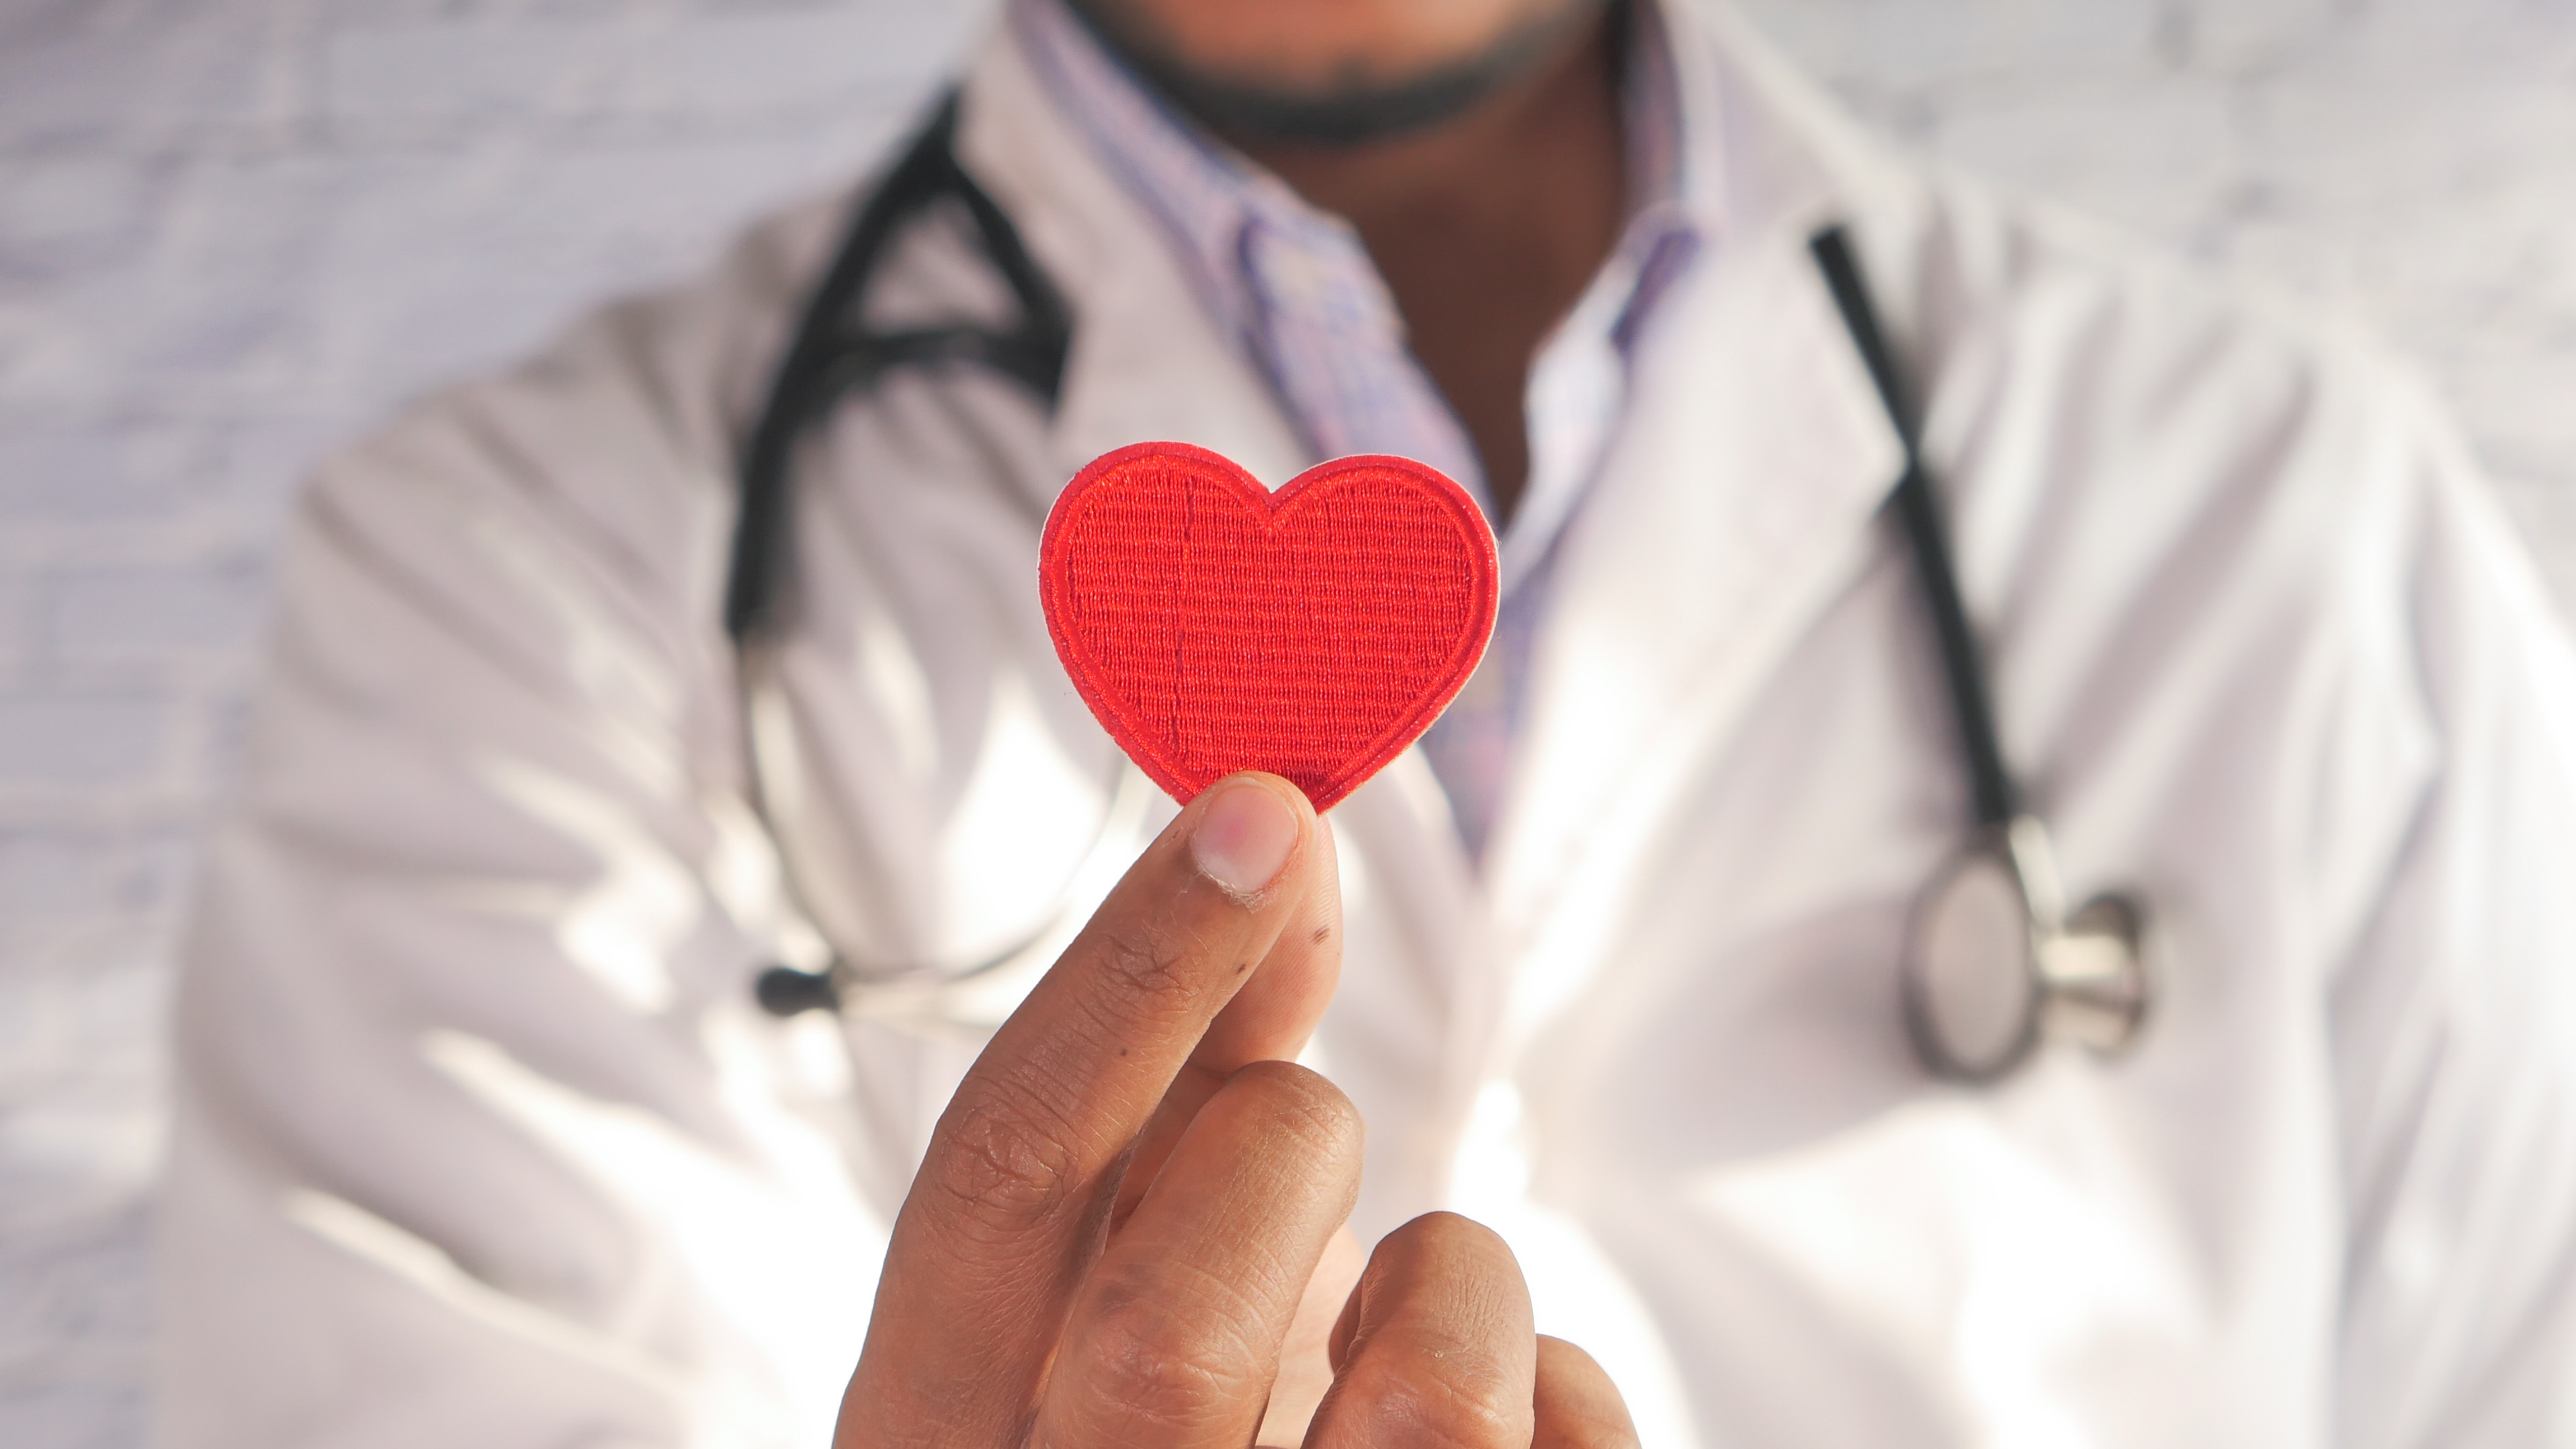 Doctor holding a cardboard red heart